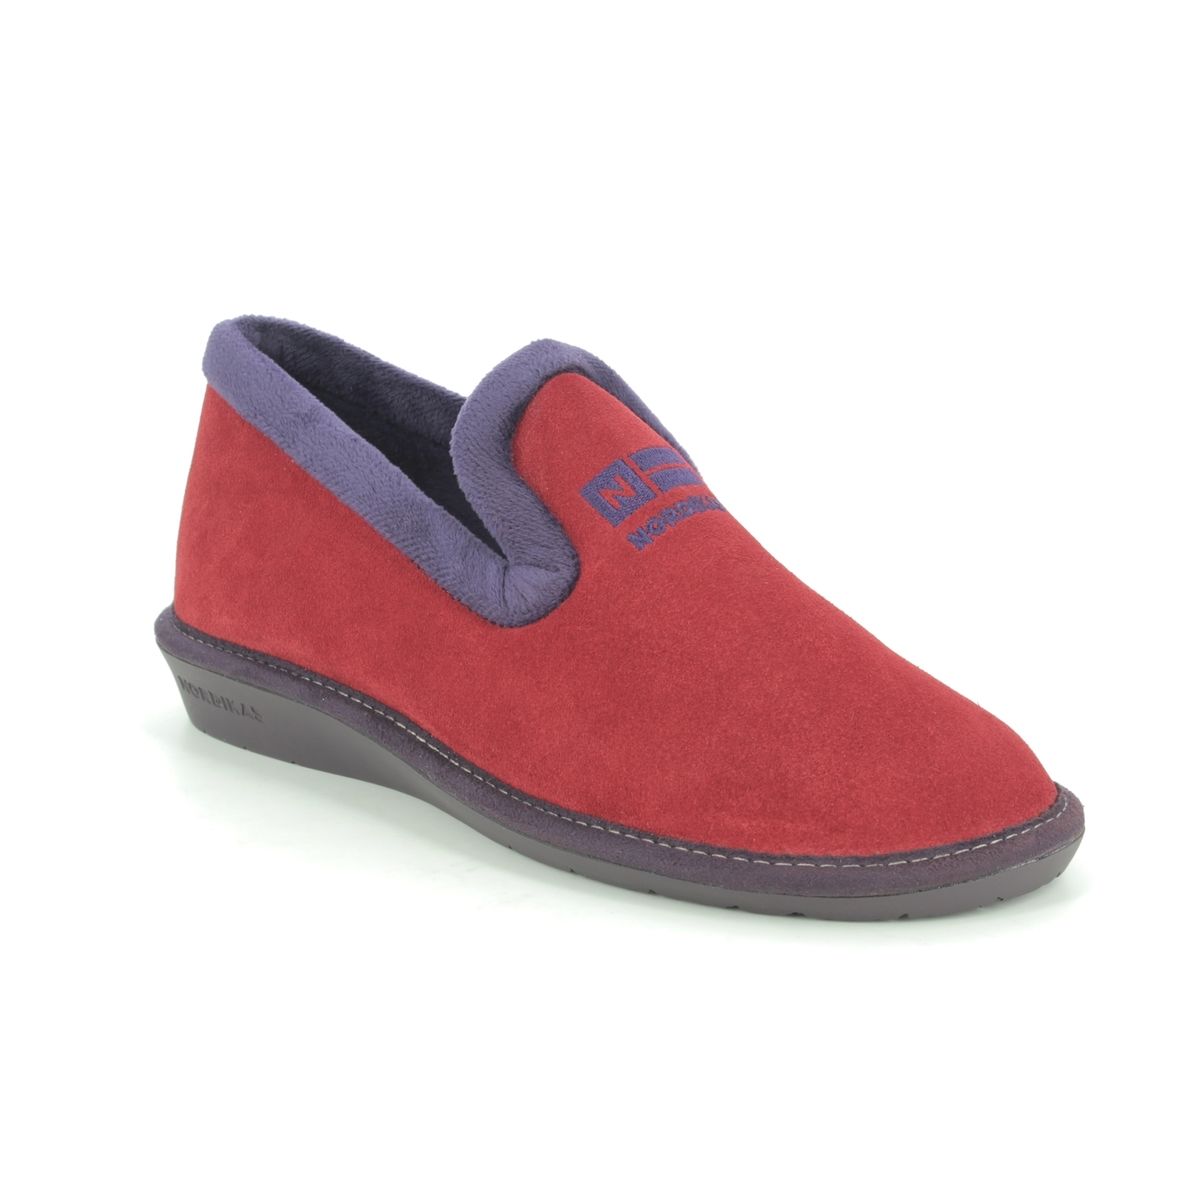 Nordikas Tabackin Red suede Womens slippers 305-4 in a Plain  in Size 42